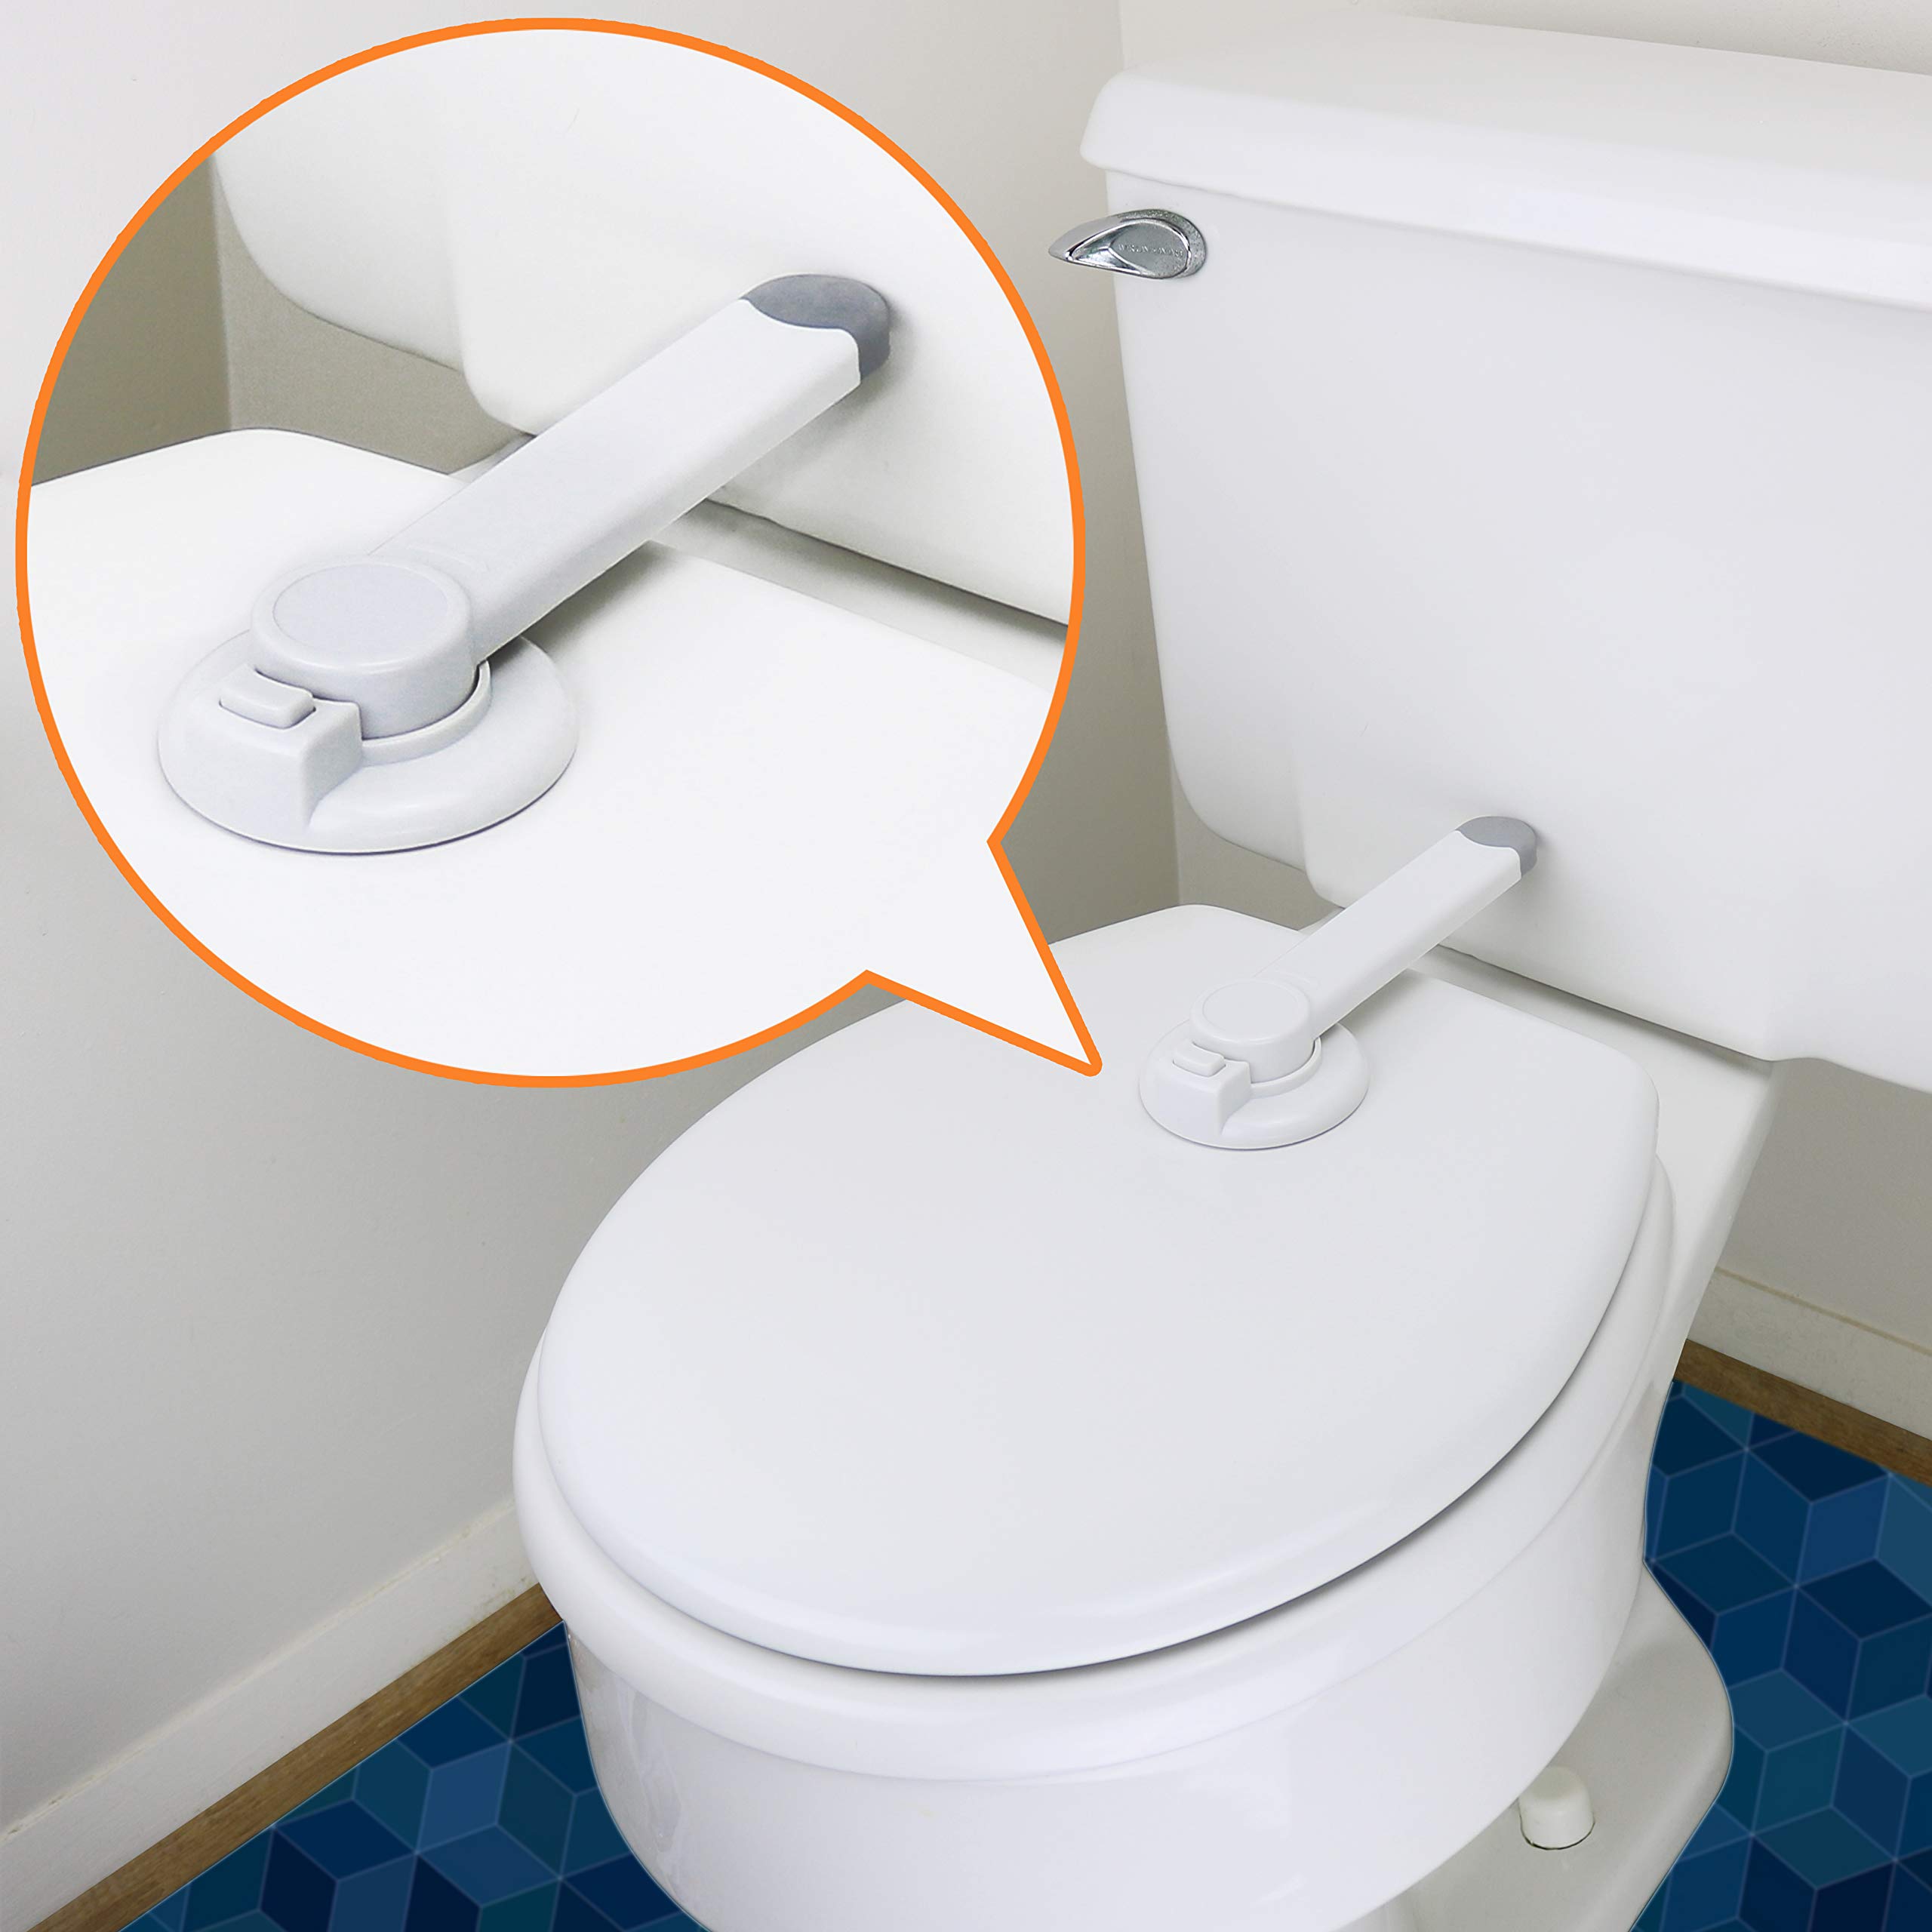 baby bunting toilet lock Proof arm babyproofing 10reviewsguide